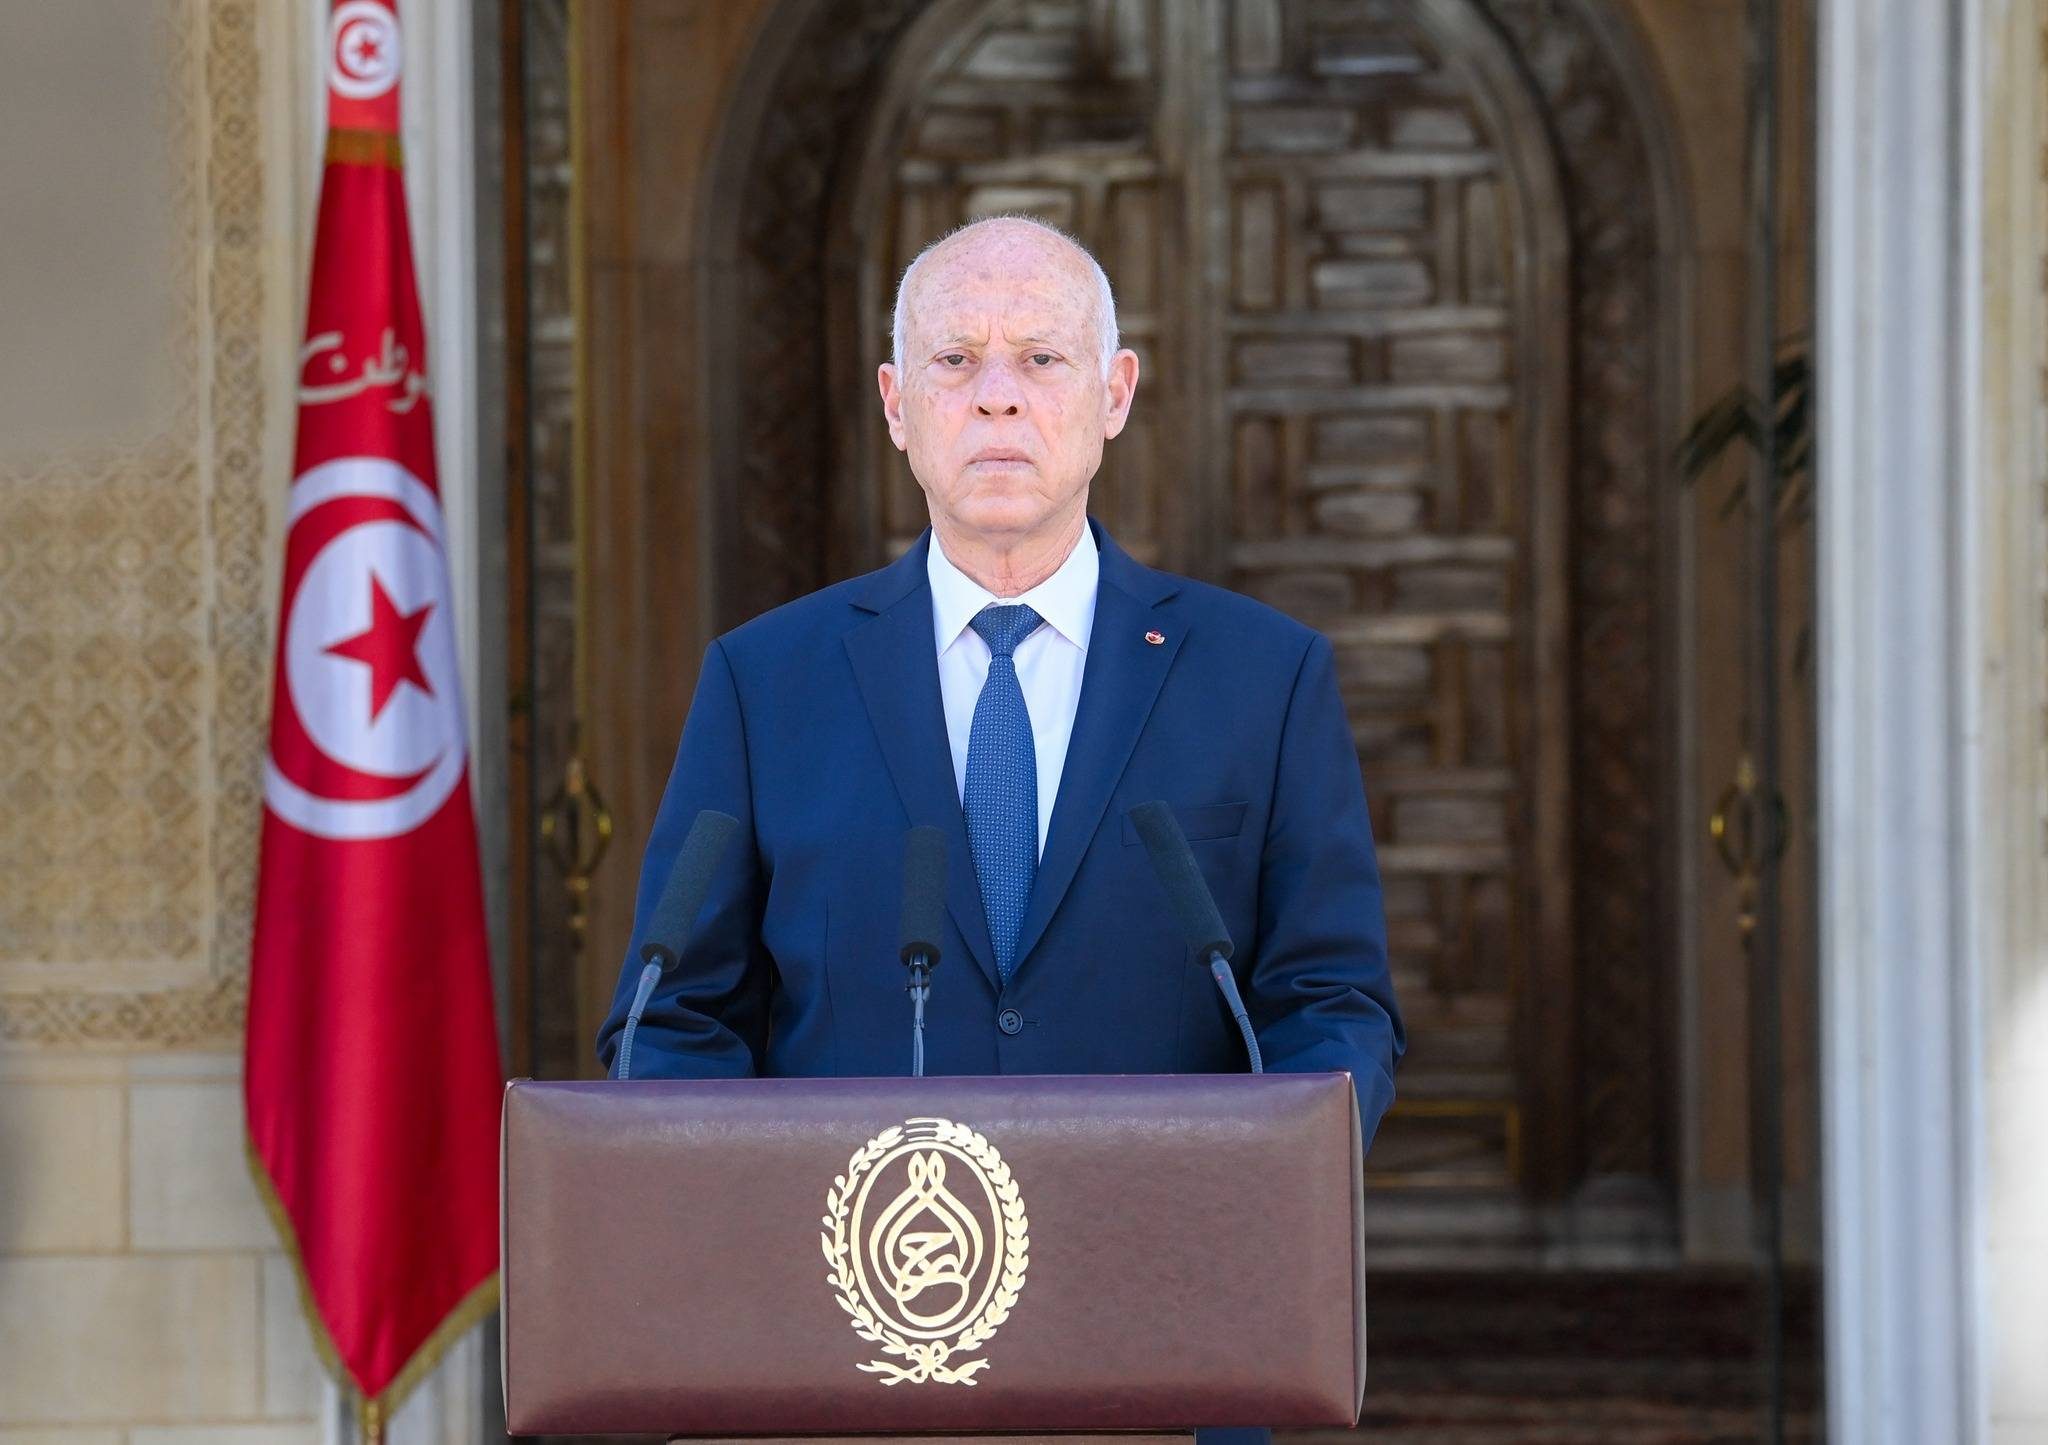 Tunisian president Kais Saied rejected the terms of an IMF deal but the country has secured other funding, including from the International Islamic Trade Finance Corporation